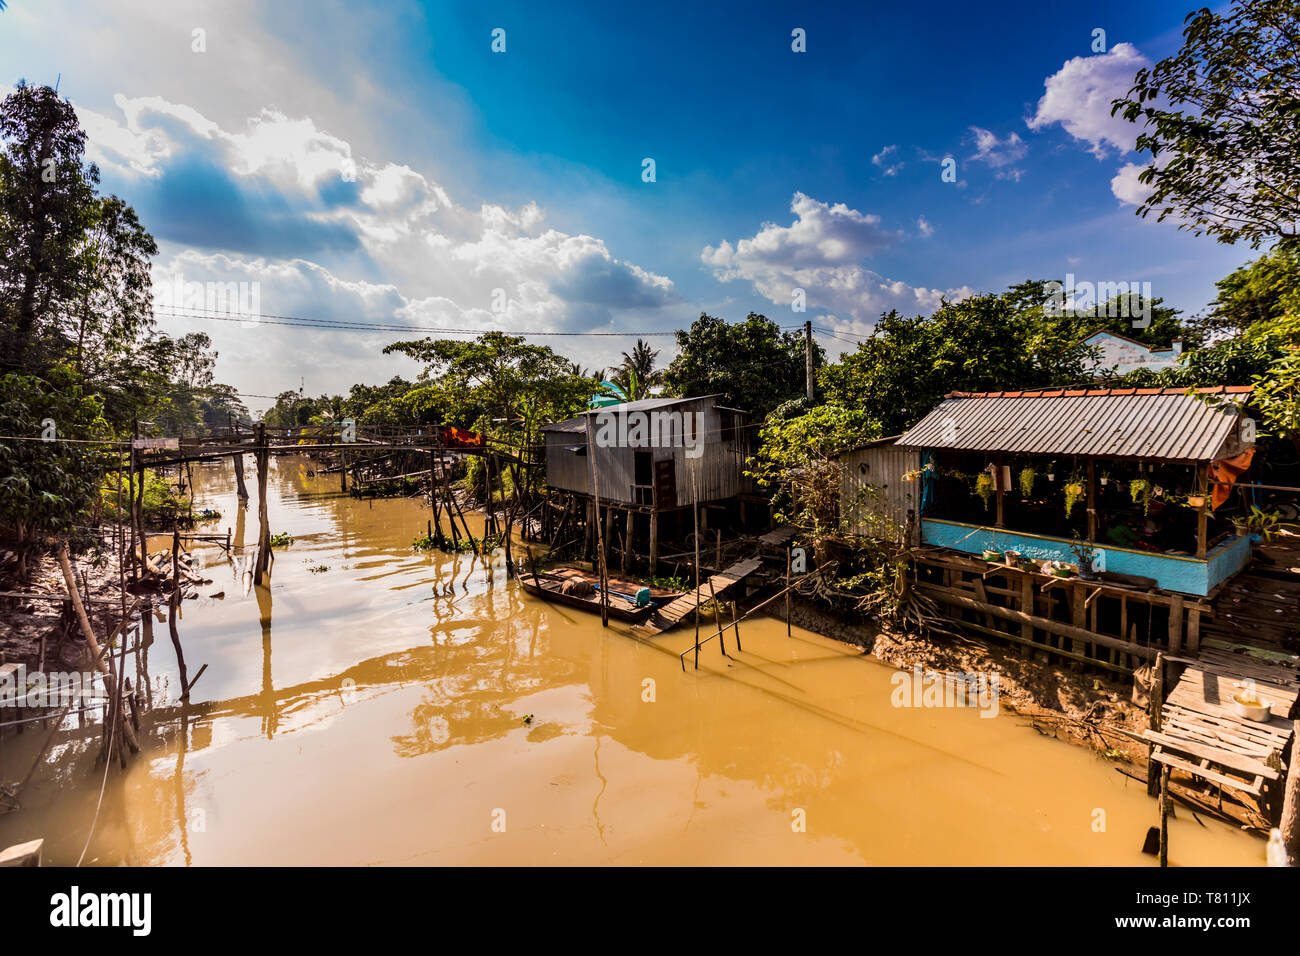 Village life on the Mekong Delta, Vietnam, Indochina, Southeast Asia, Asia Stock Photo